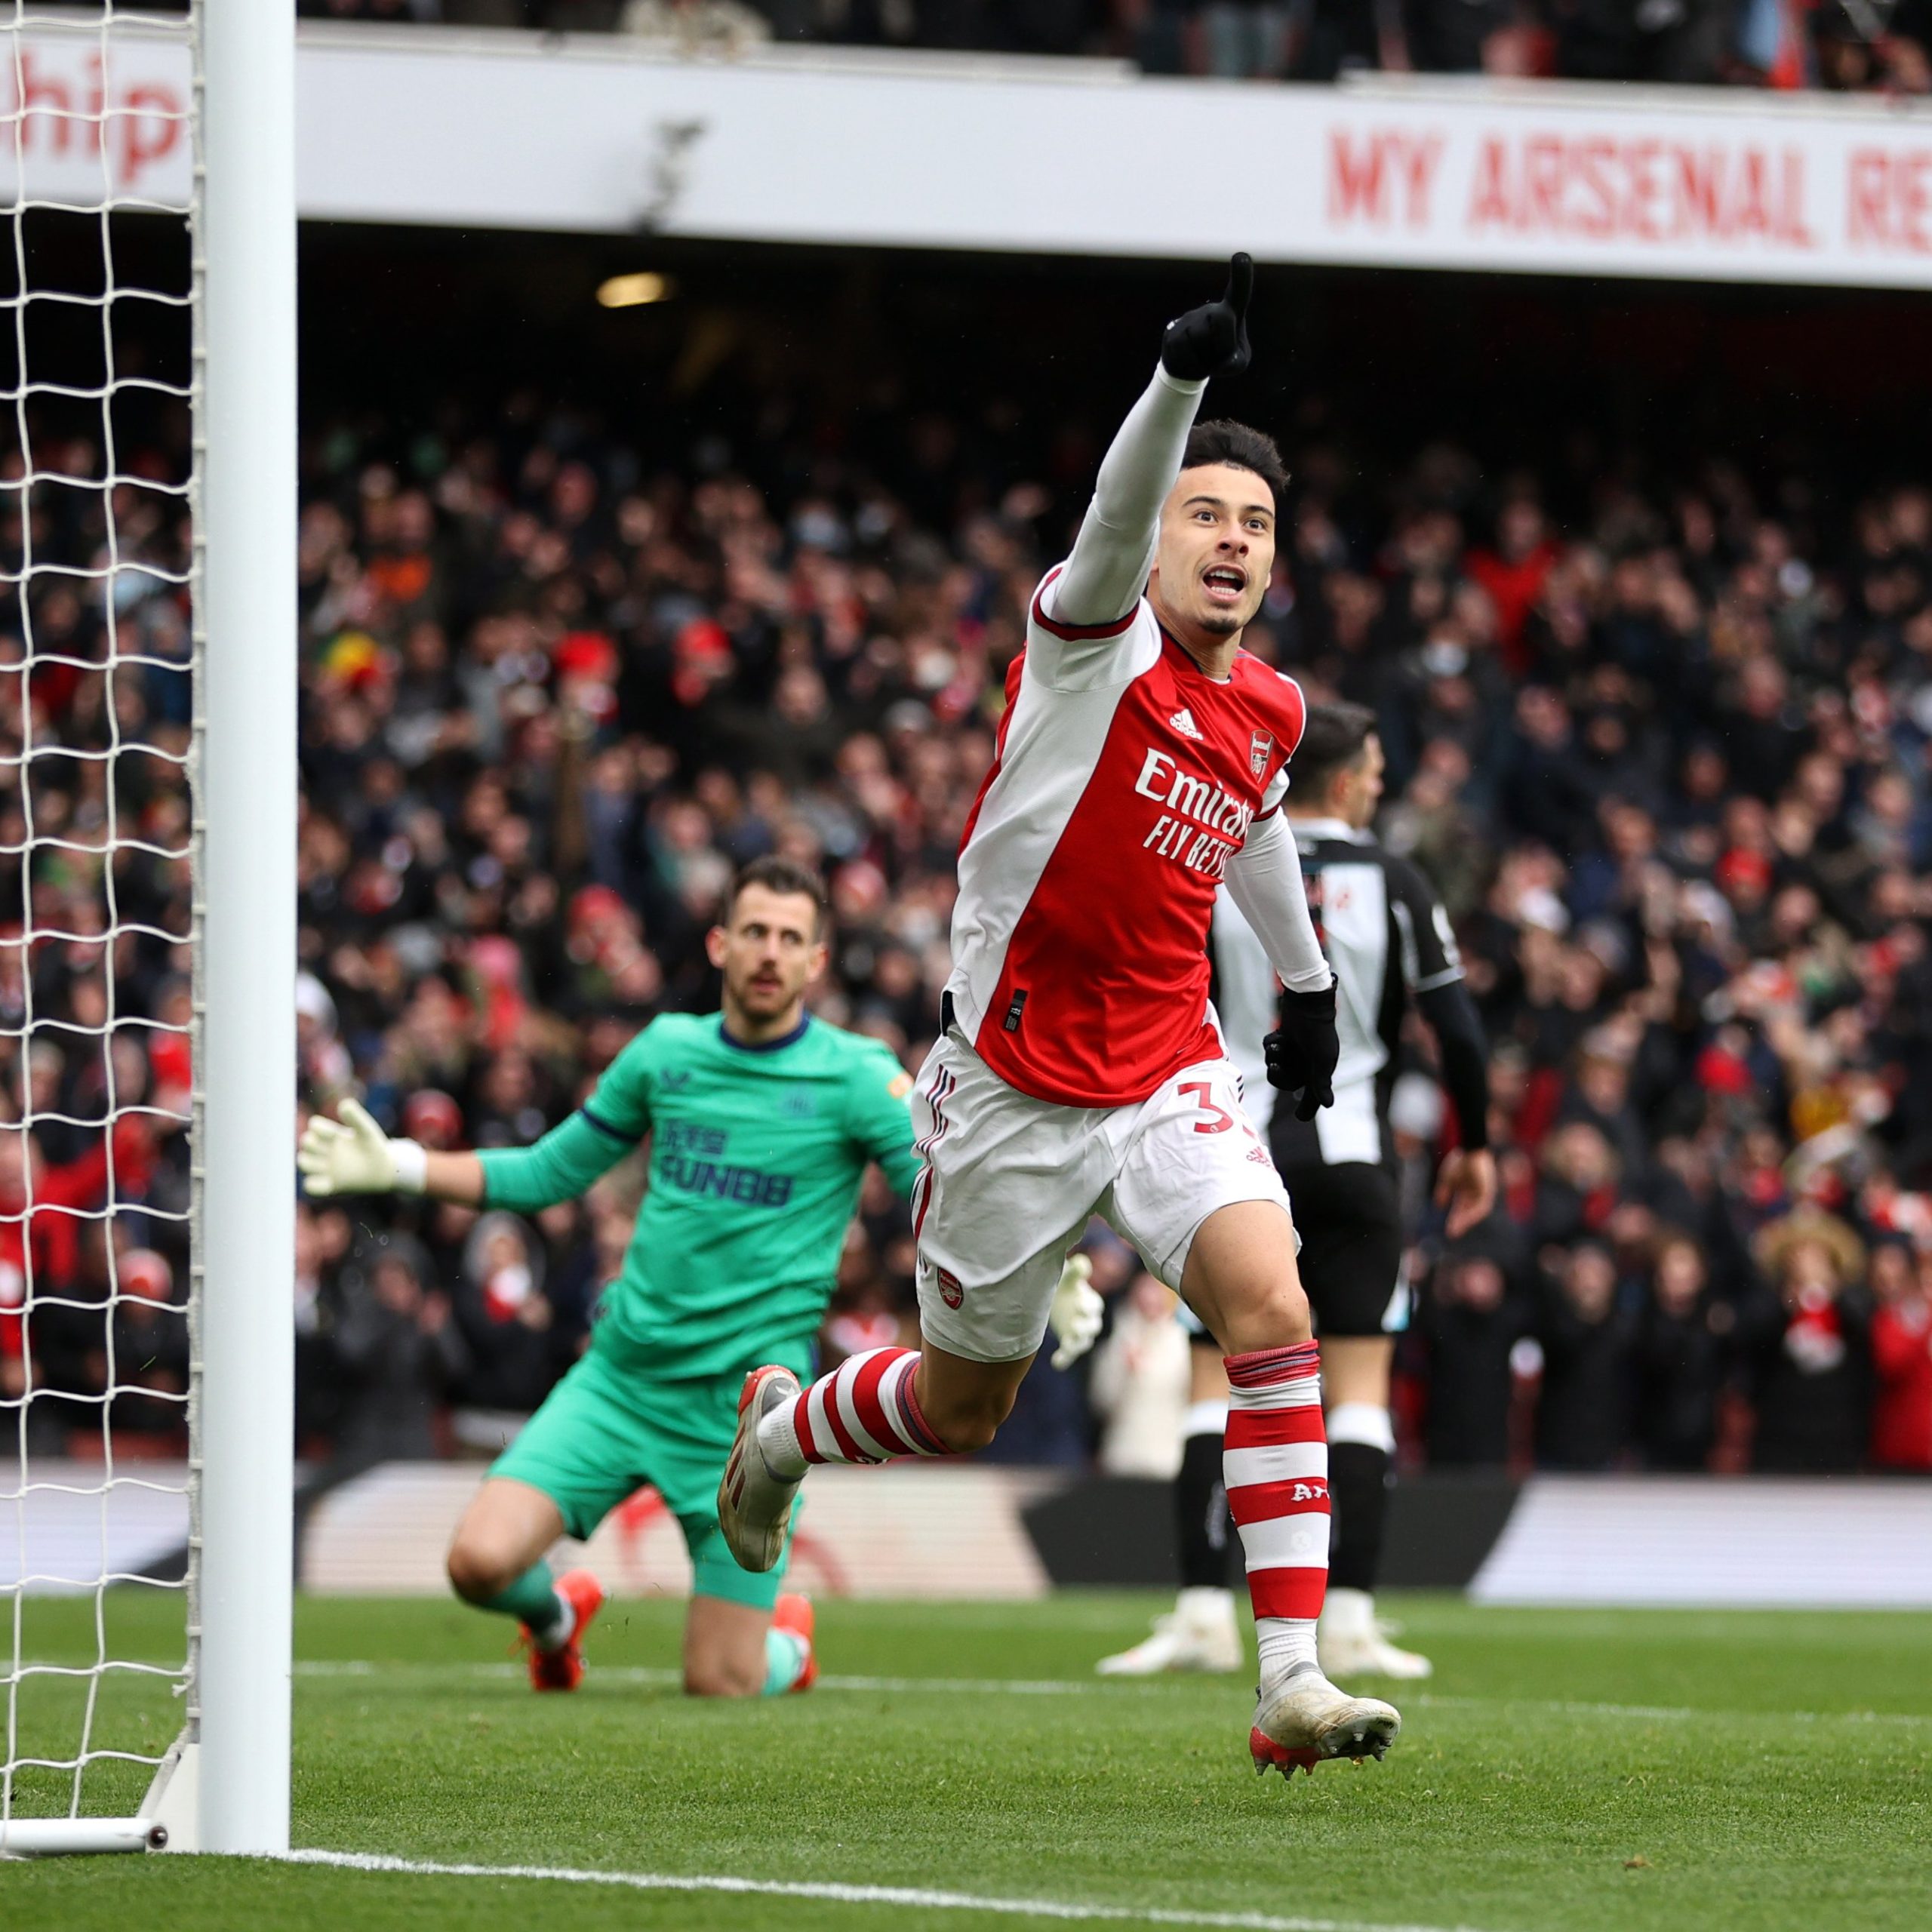 Premier League LIVE: Saka & Martinelli fire Arsenal 2-0 against Newcastle; The Gunners move 4 points clear of Wolves while Newcastle stay bottom